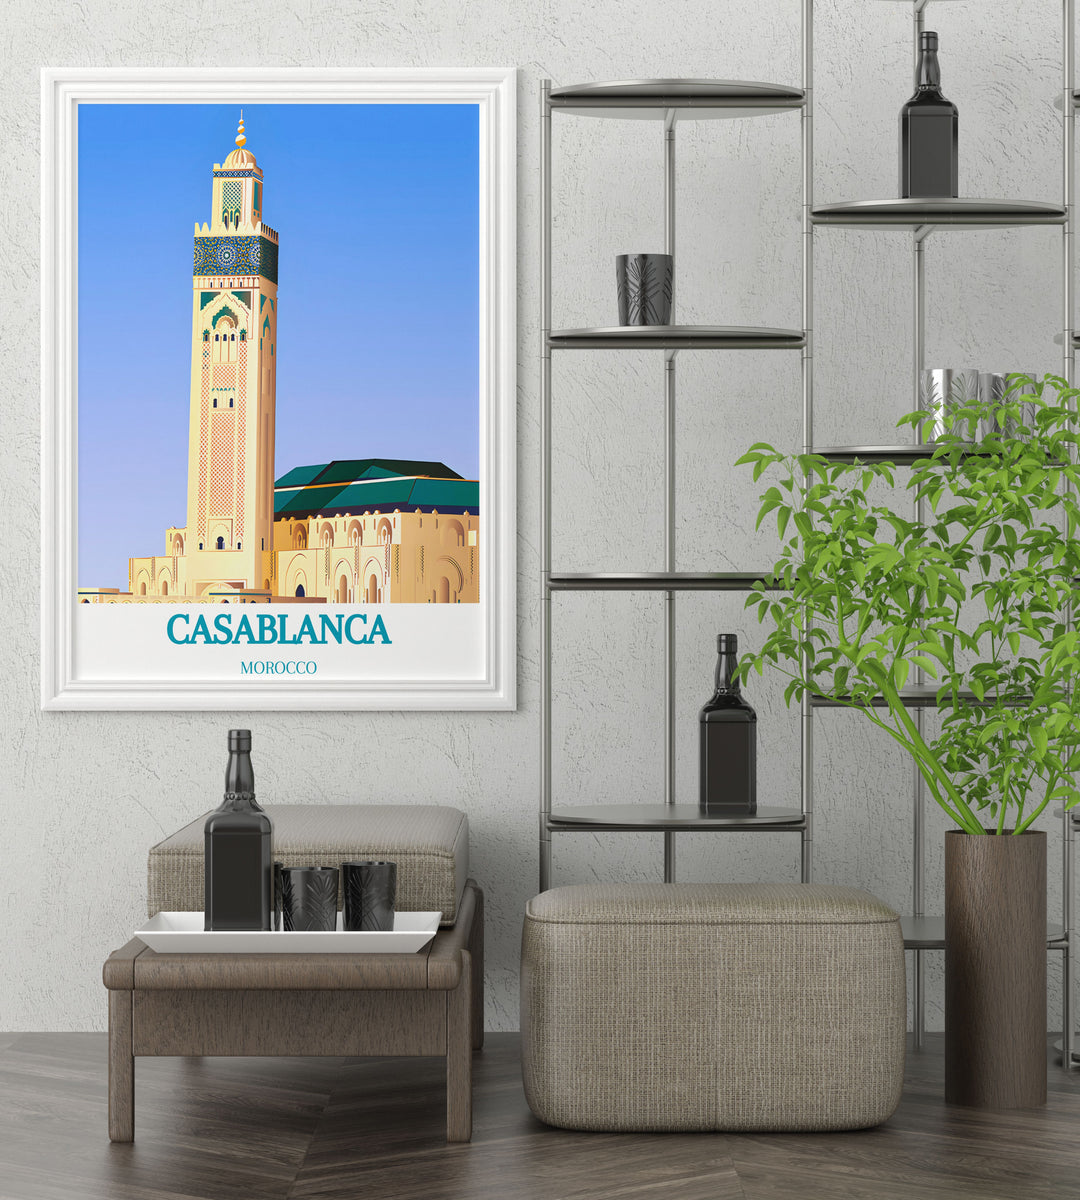 Beautifully captured Casablanca street scene, reflecting the lively atmosphere and cultural richness of Moroccan urban life.